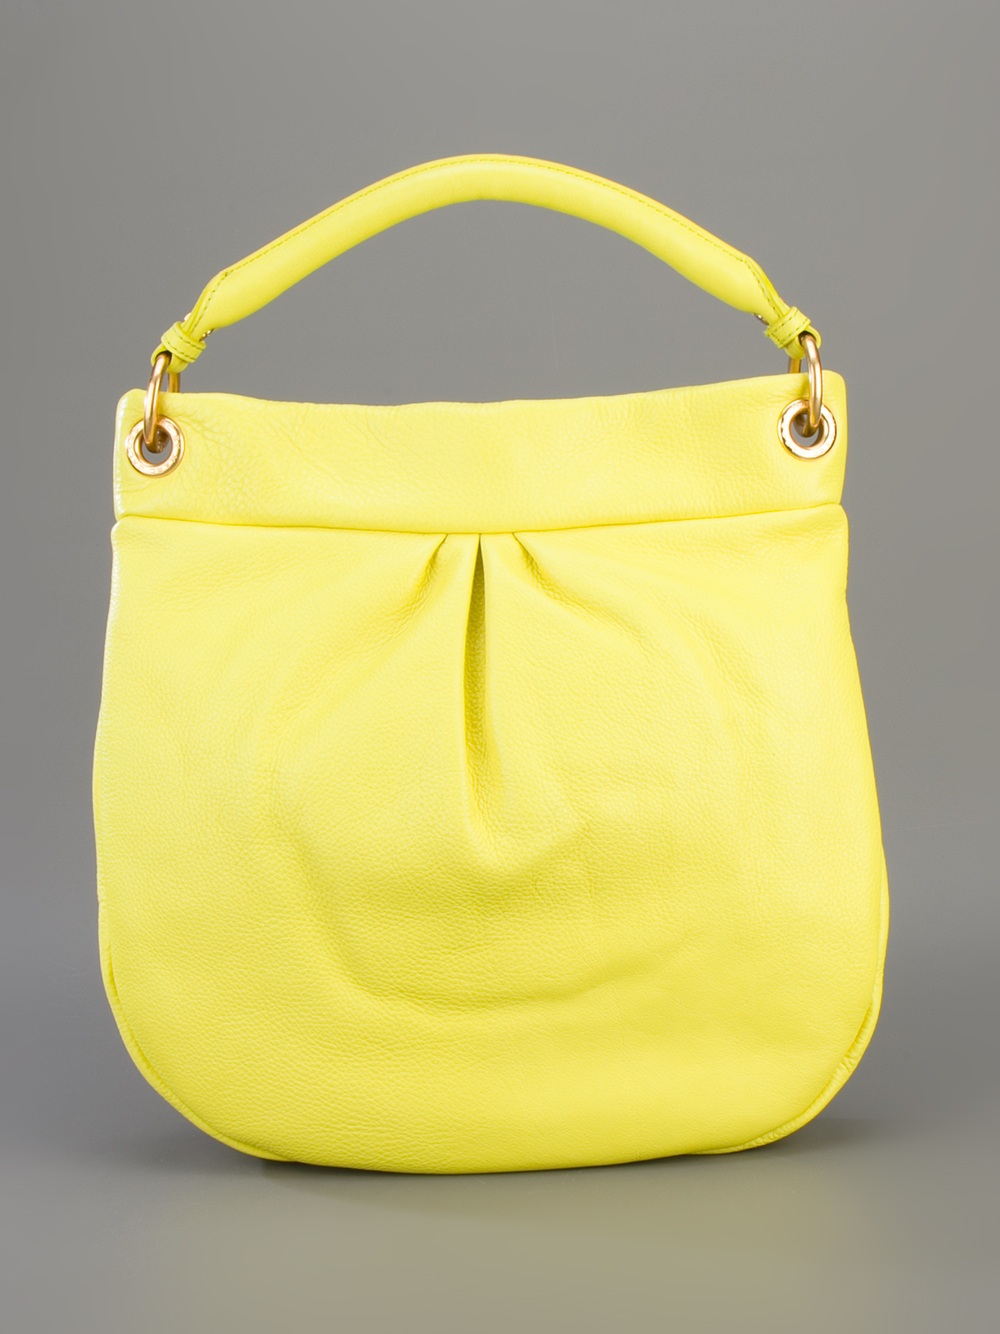 Marc By Marc Jacobs The Classic Q Hillier Hobo Tote Bag in Yellow - Lyst